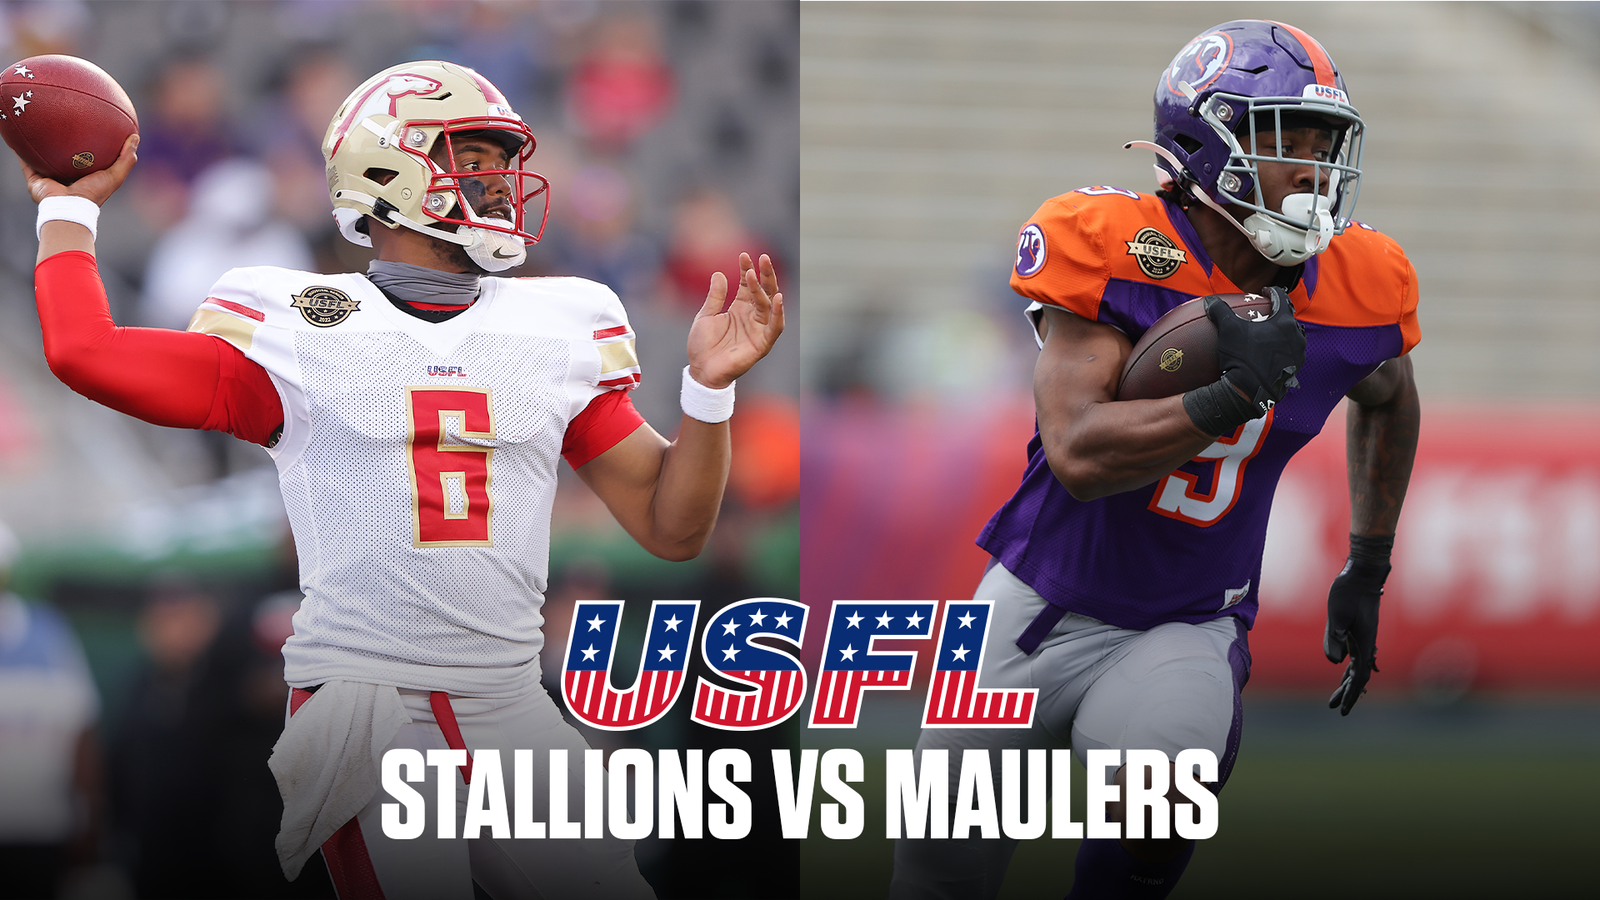 Stallions clinch playoff spot with win over Maulers